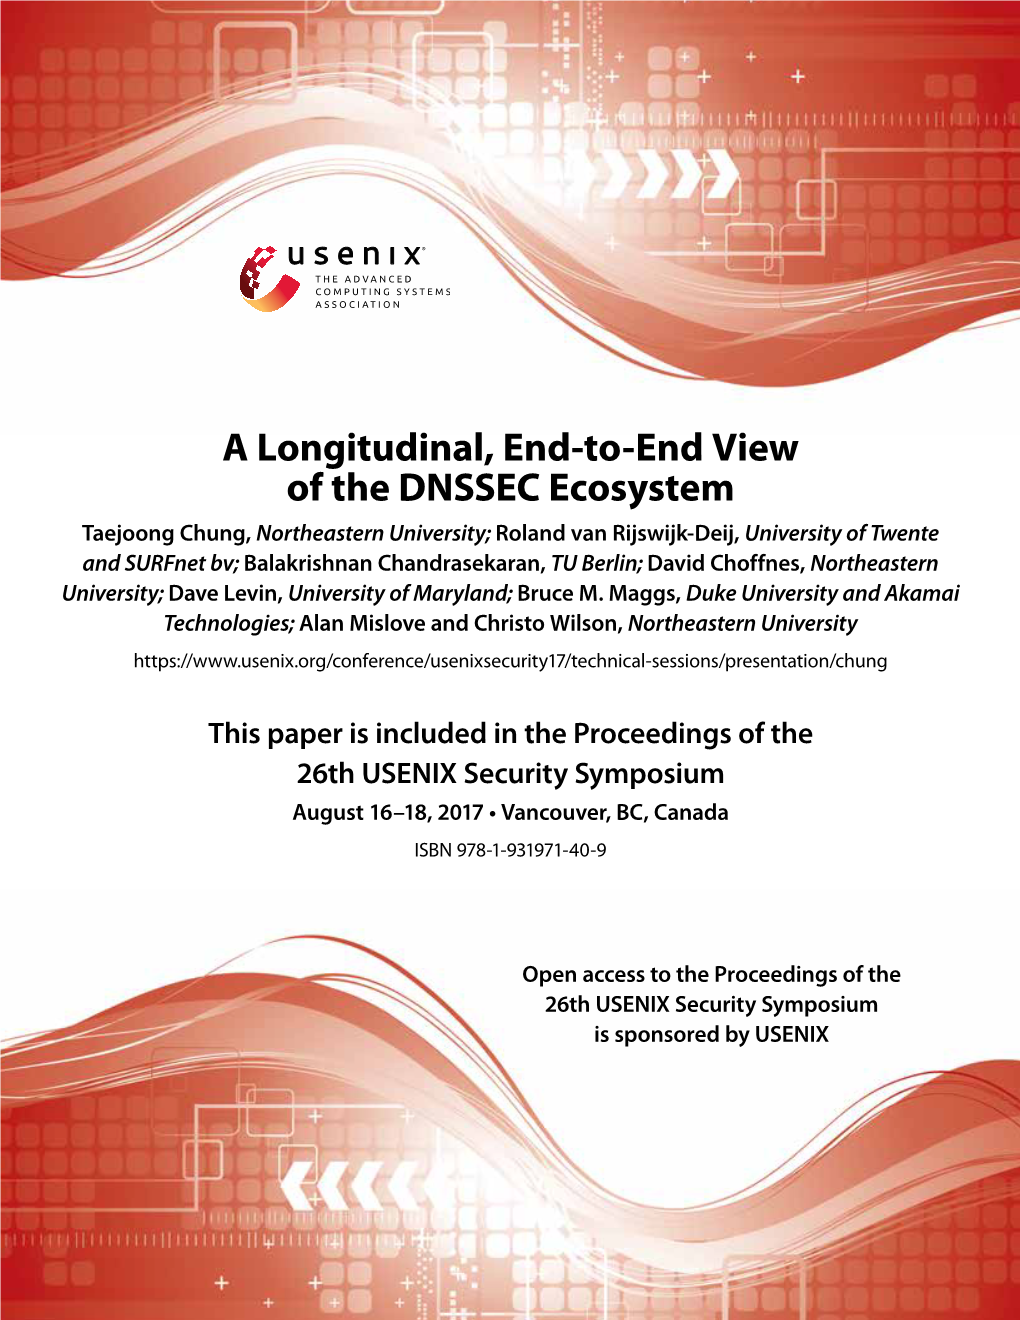 A Longitudinal, End-To-End View of the DNSSEC Ecosystem